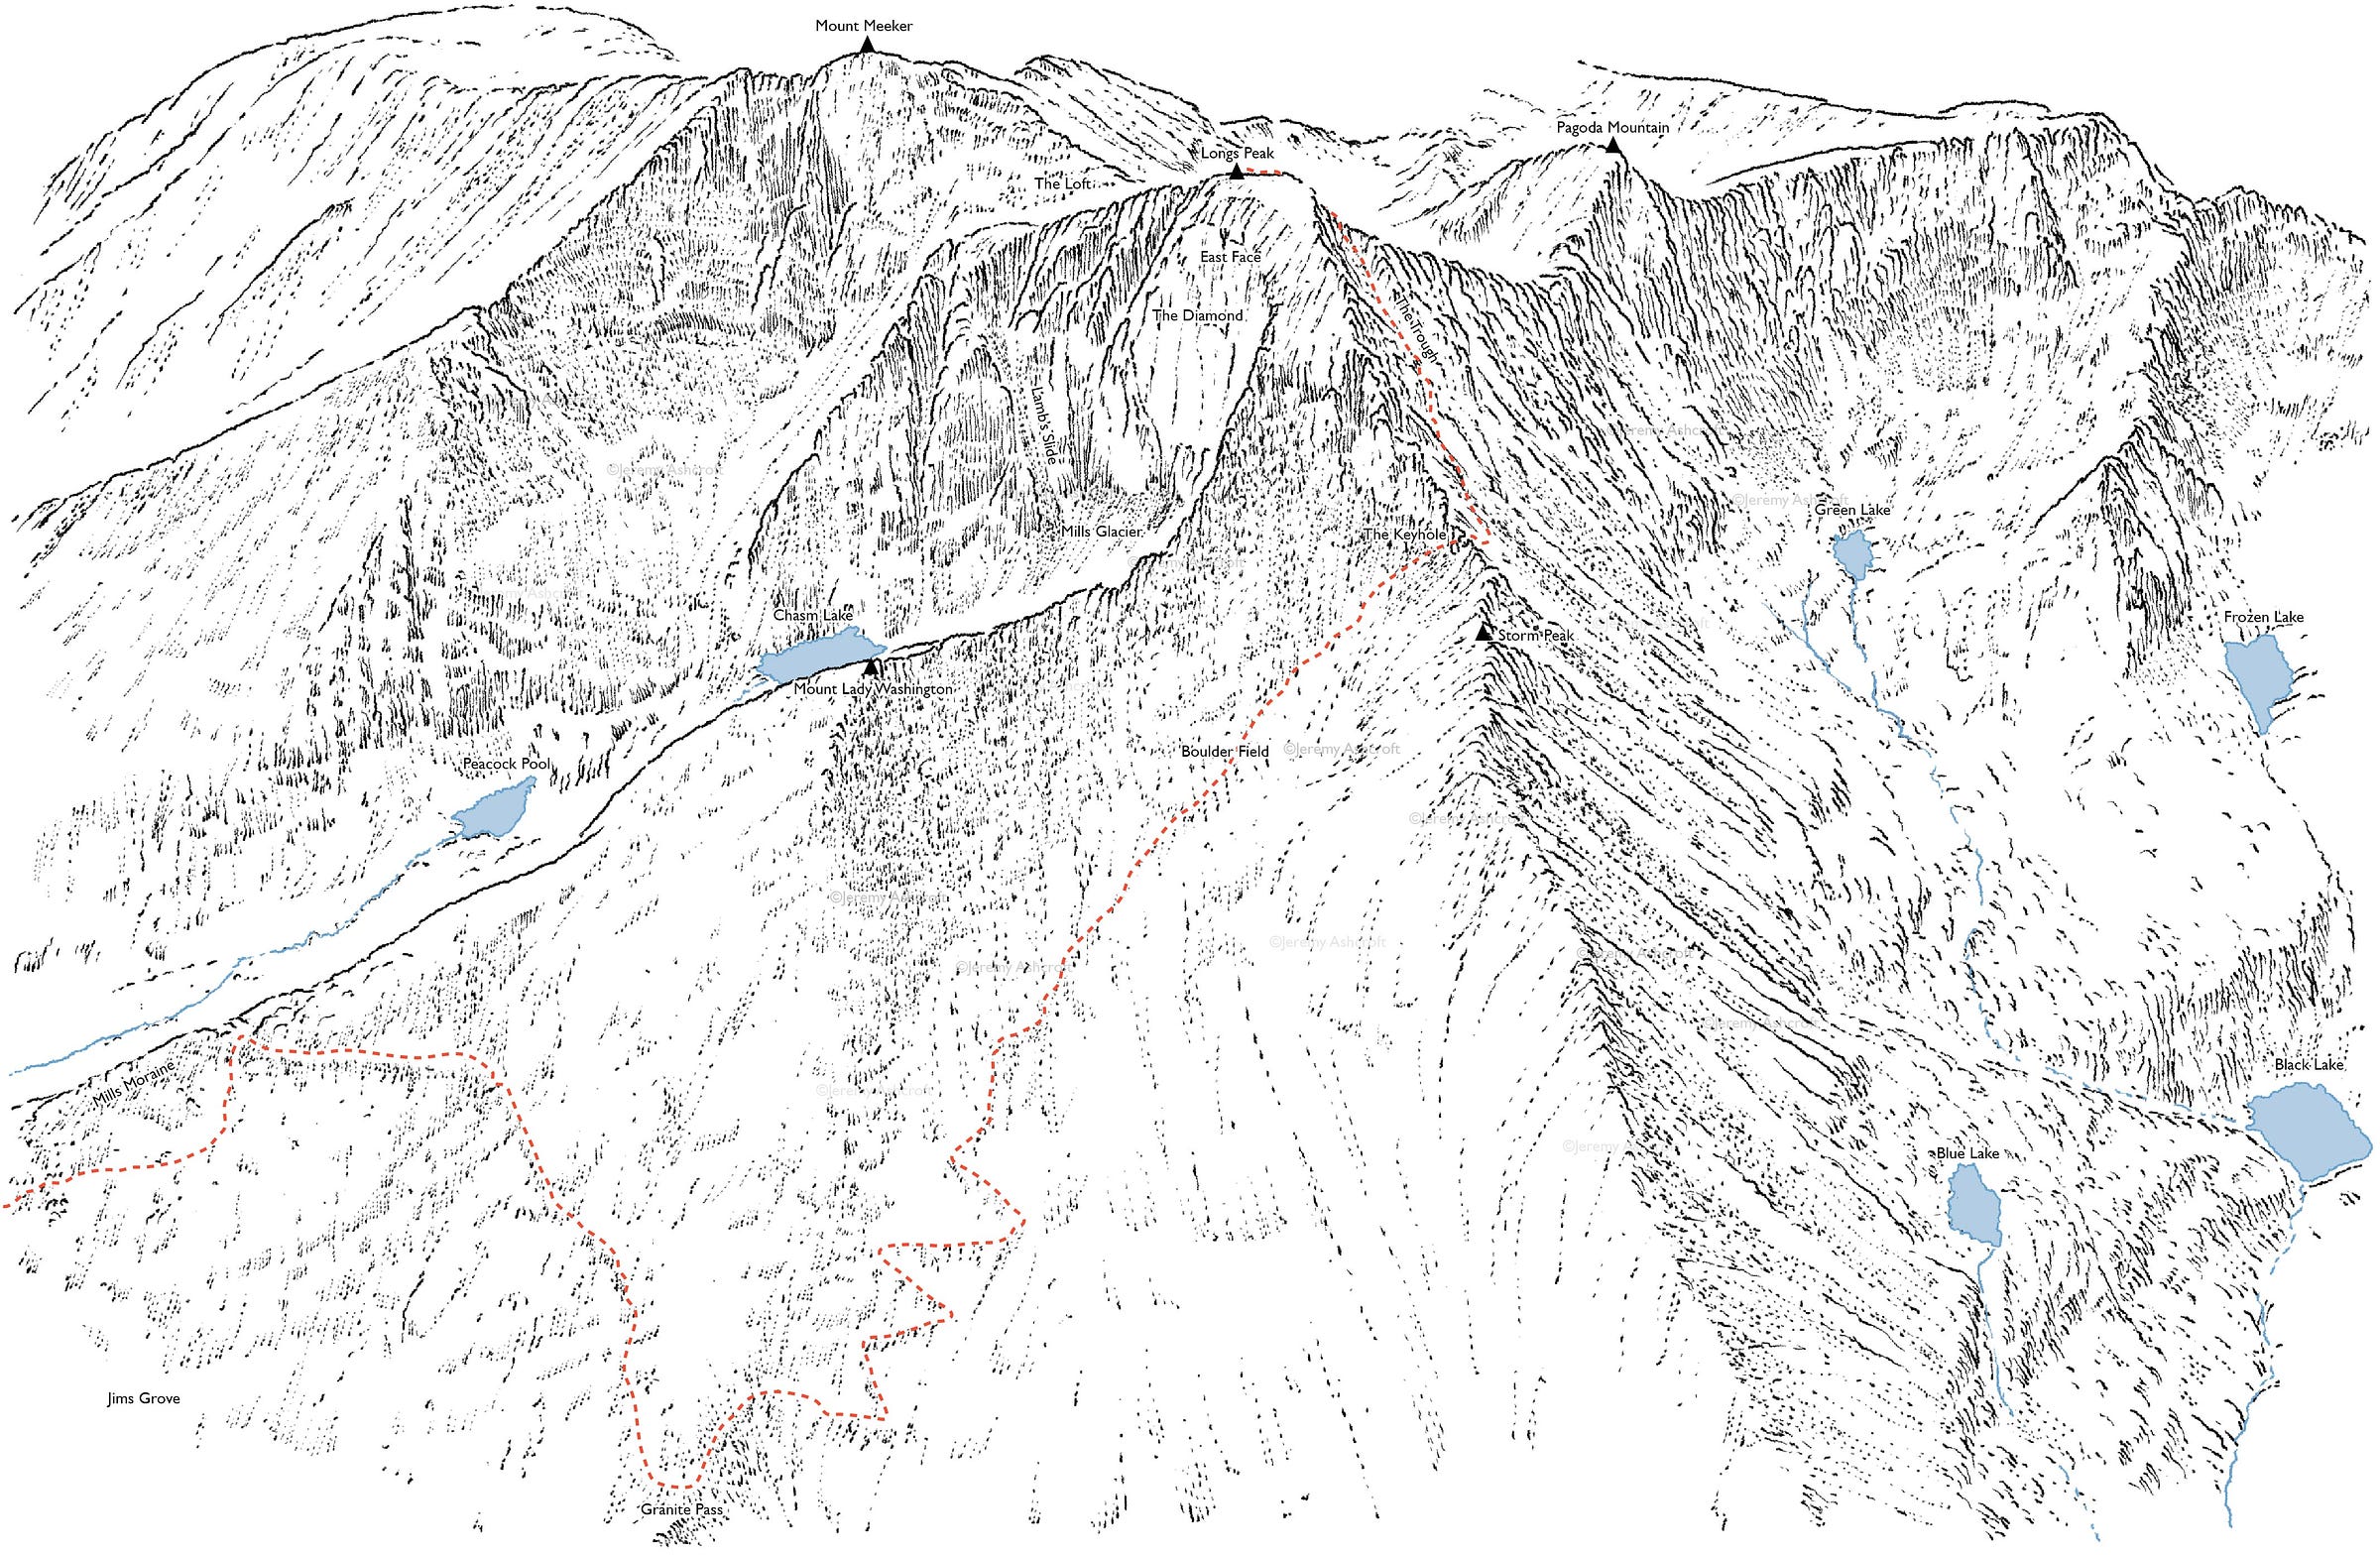 a different variation of Longs Peak, with a mapped out trail through the keyhole